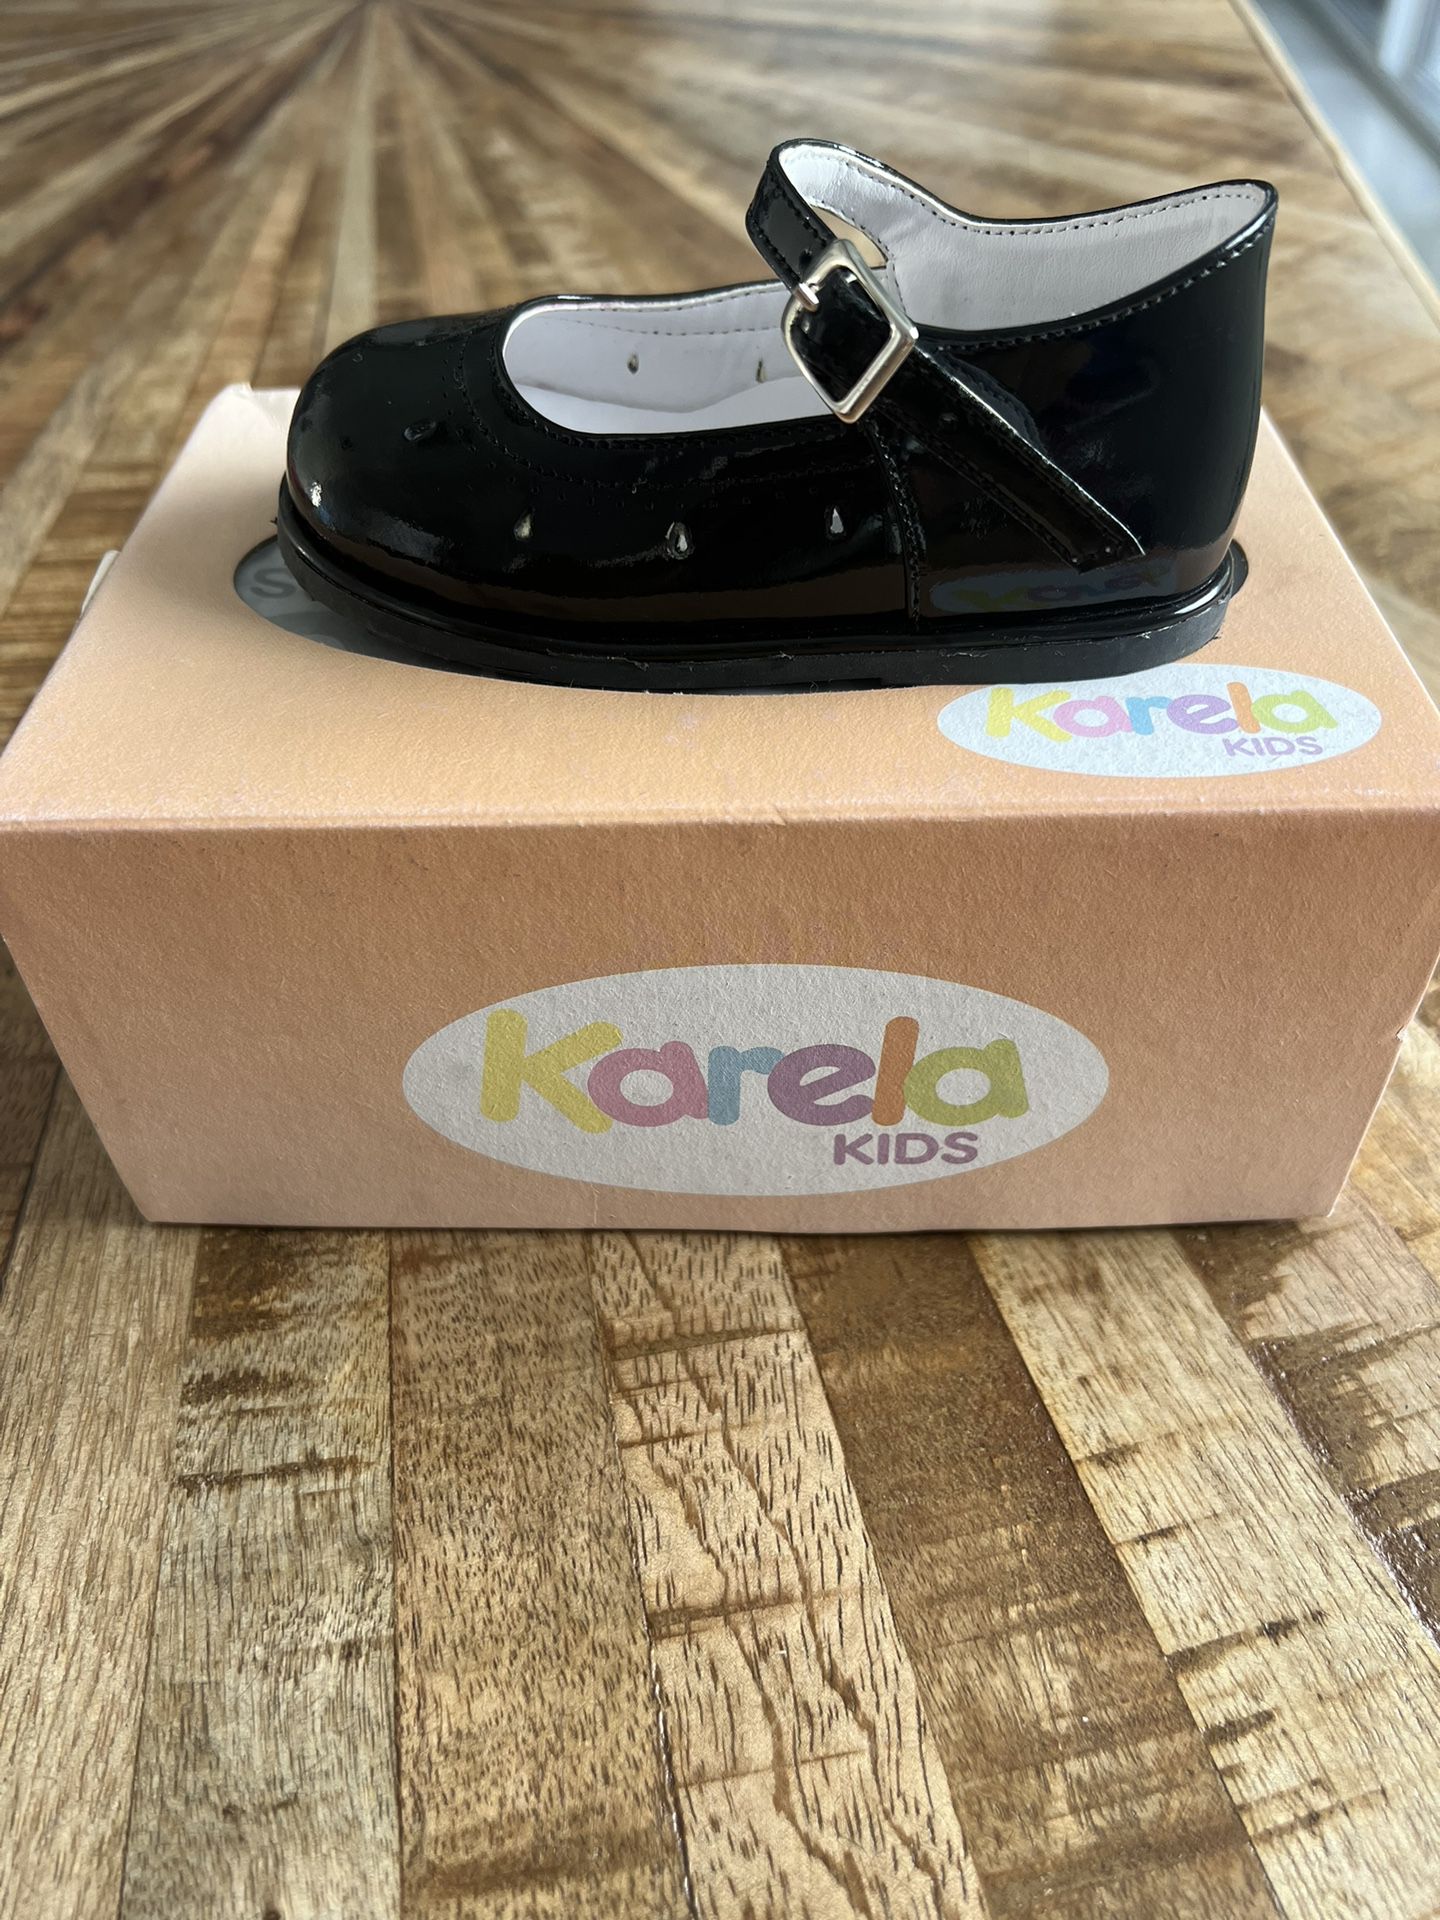 GIRLS DRESS SHOES - GREAT CONDITION 